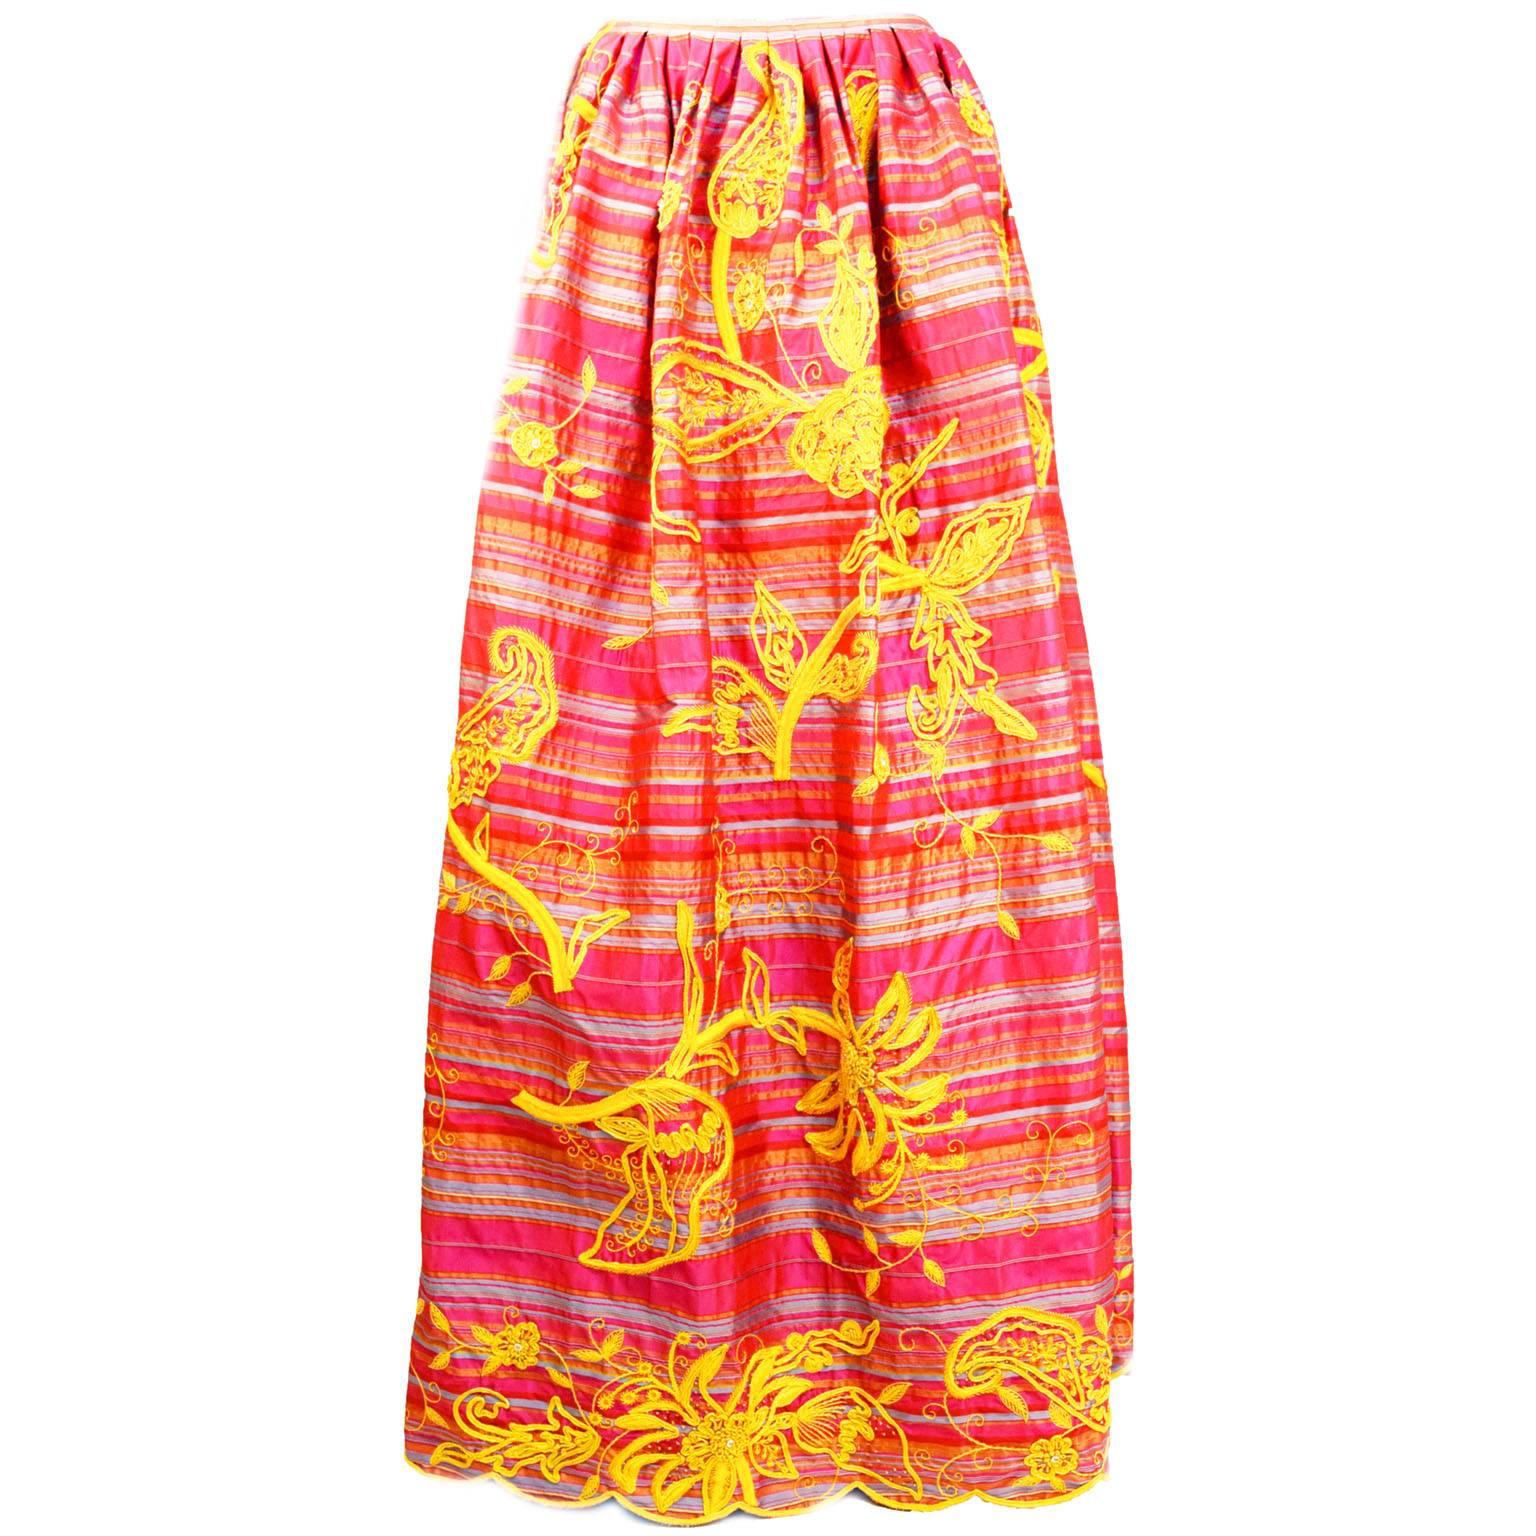 Oscar de la Renta signature design is all over this beautiful taffeta skirt. The outstanding blend of color, sutash in yellow all over the skirt along with sequins embellishment. Waist band with gathering all around. Zipper closure.
Year 2007.